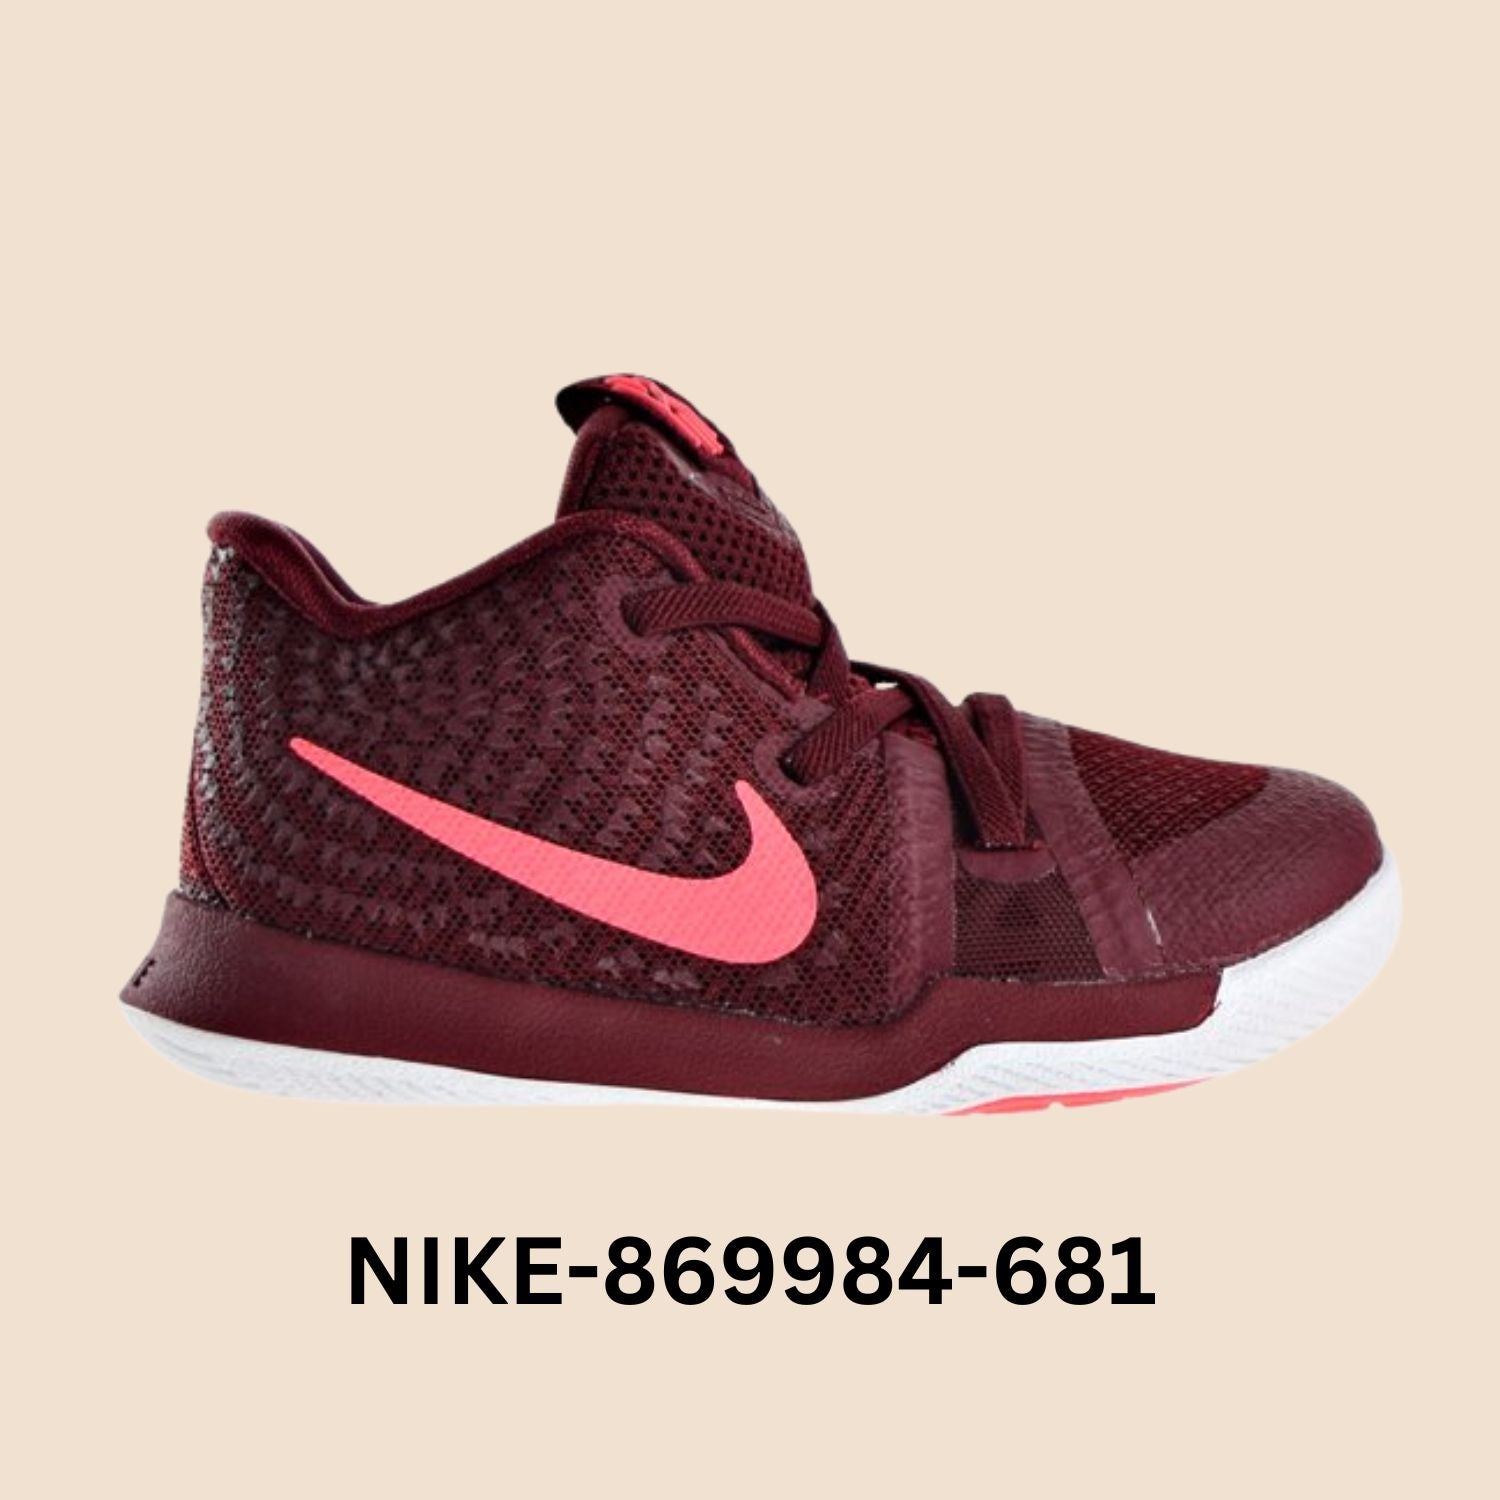 Nike Kyrie 3 "Hot Punch" Toddlers Style# 869984-681